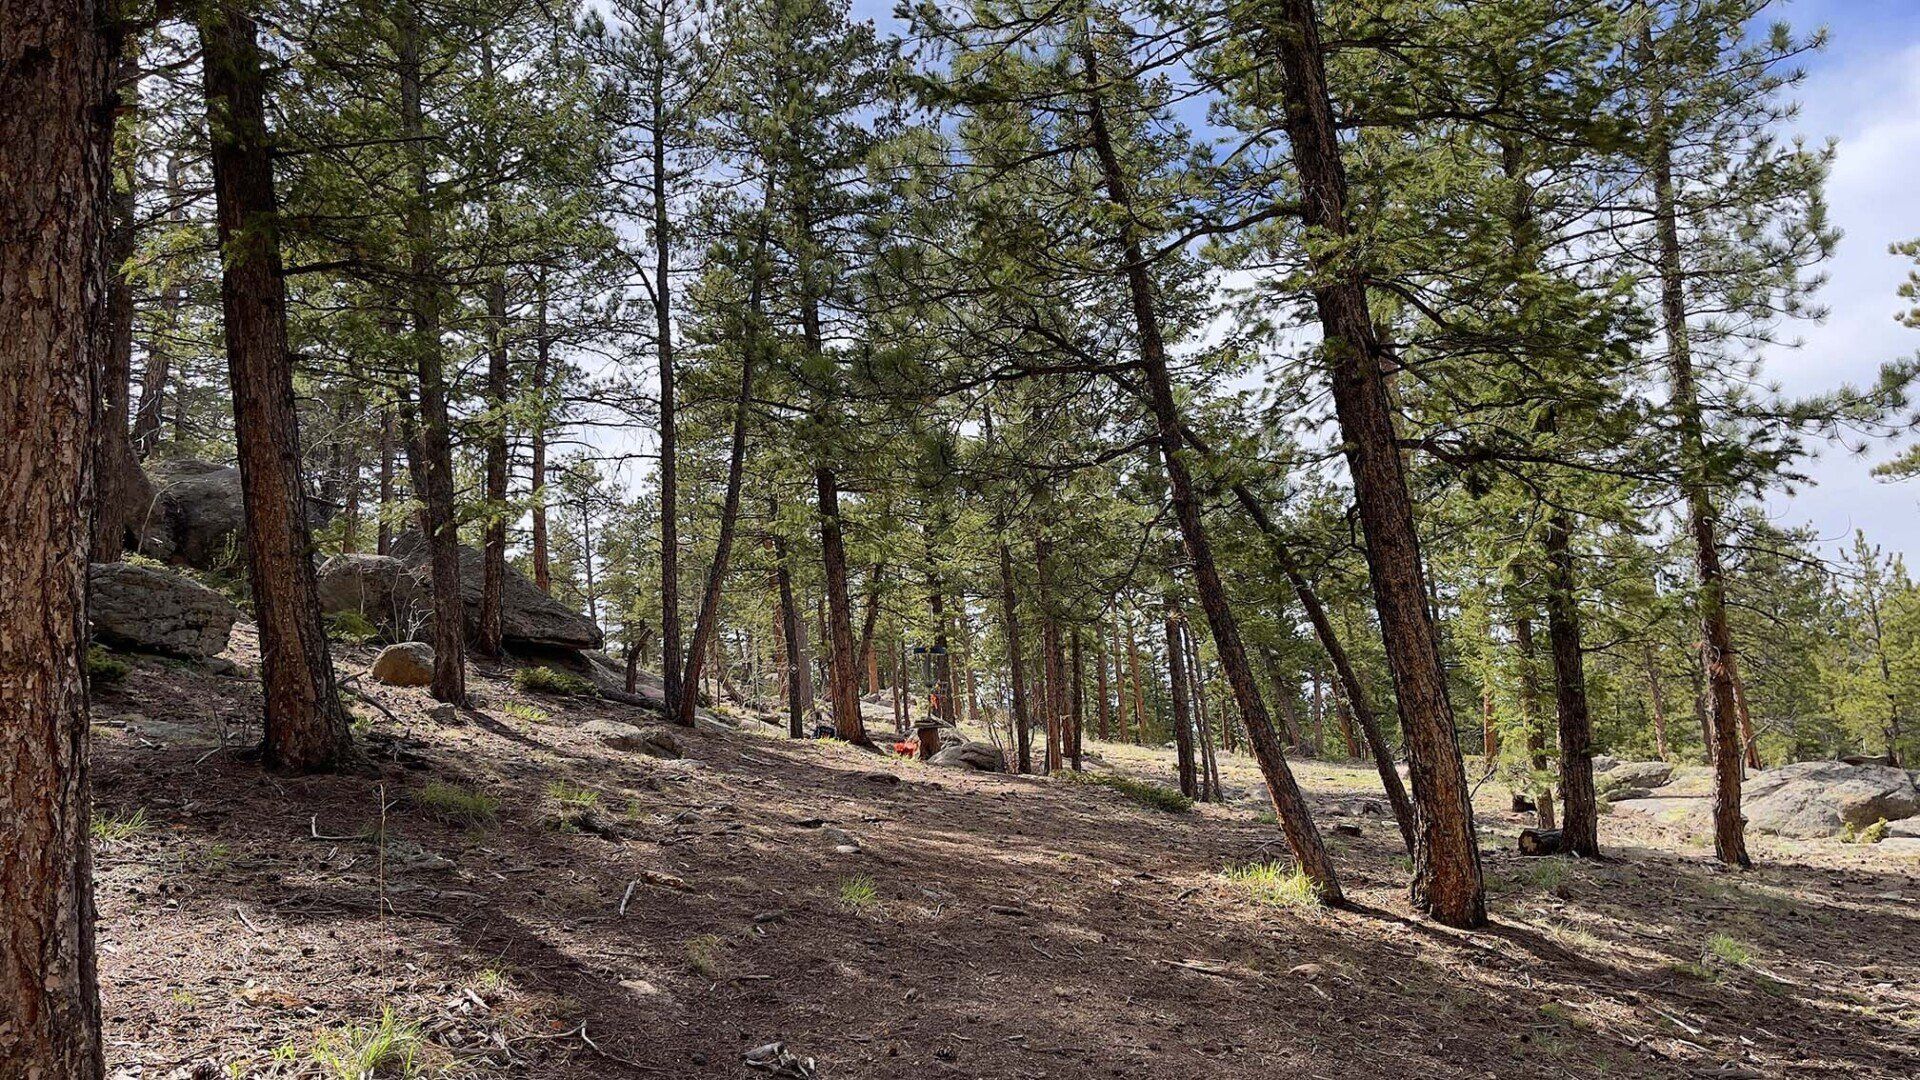 New disc golf hole 4 at Sundance Trail Guest Ranch May 2022